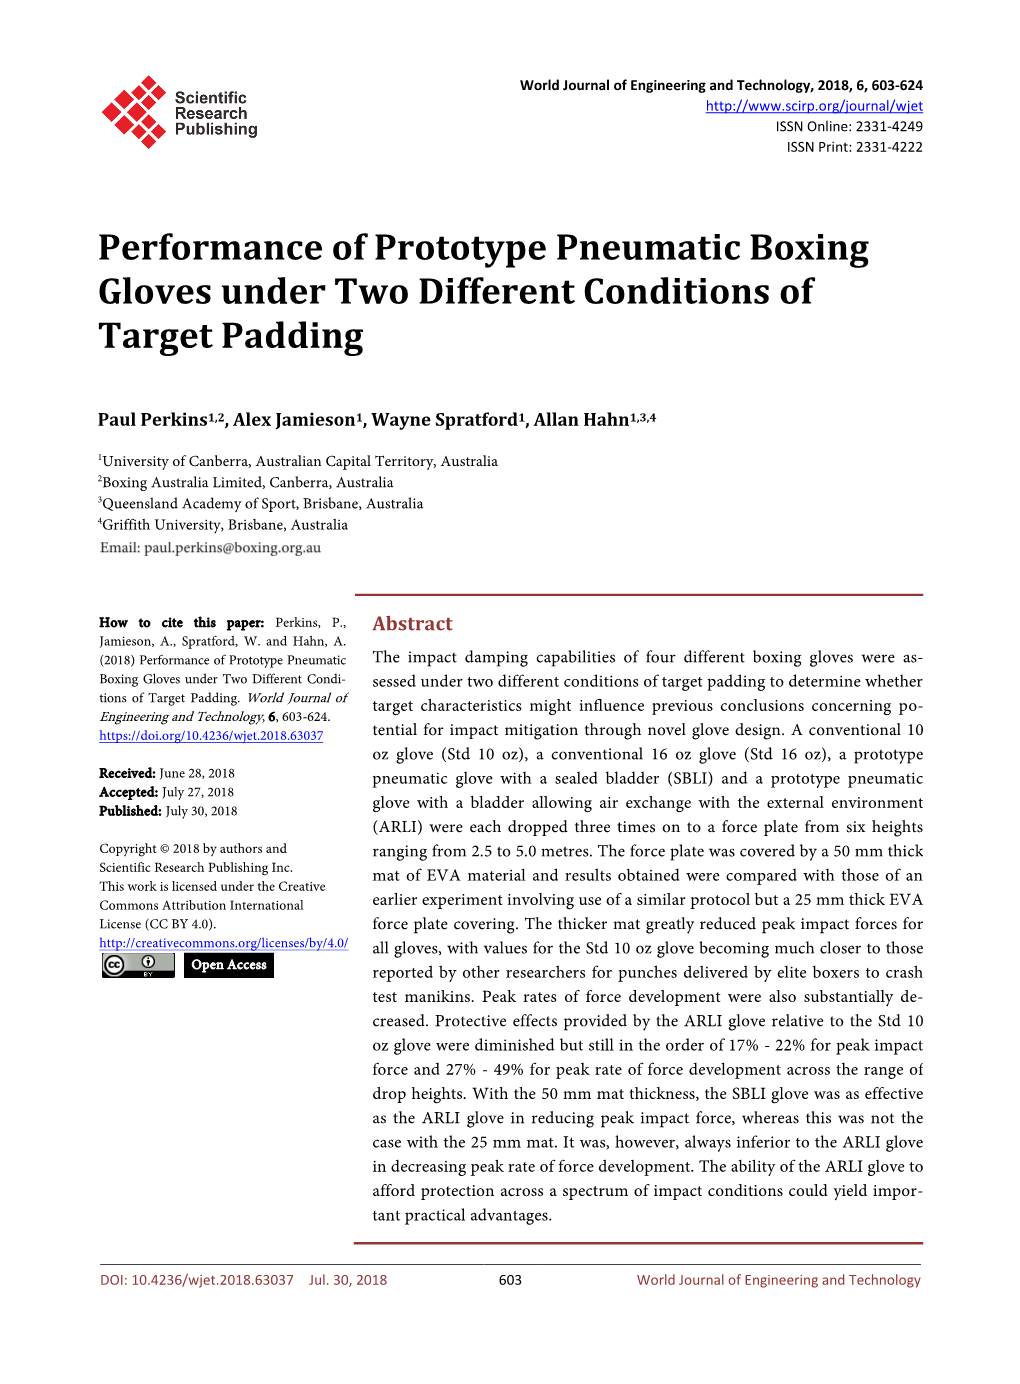 Performance of Prototype Pneumatic Boxing Gloves Under Two Different Conditions of Target Padding